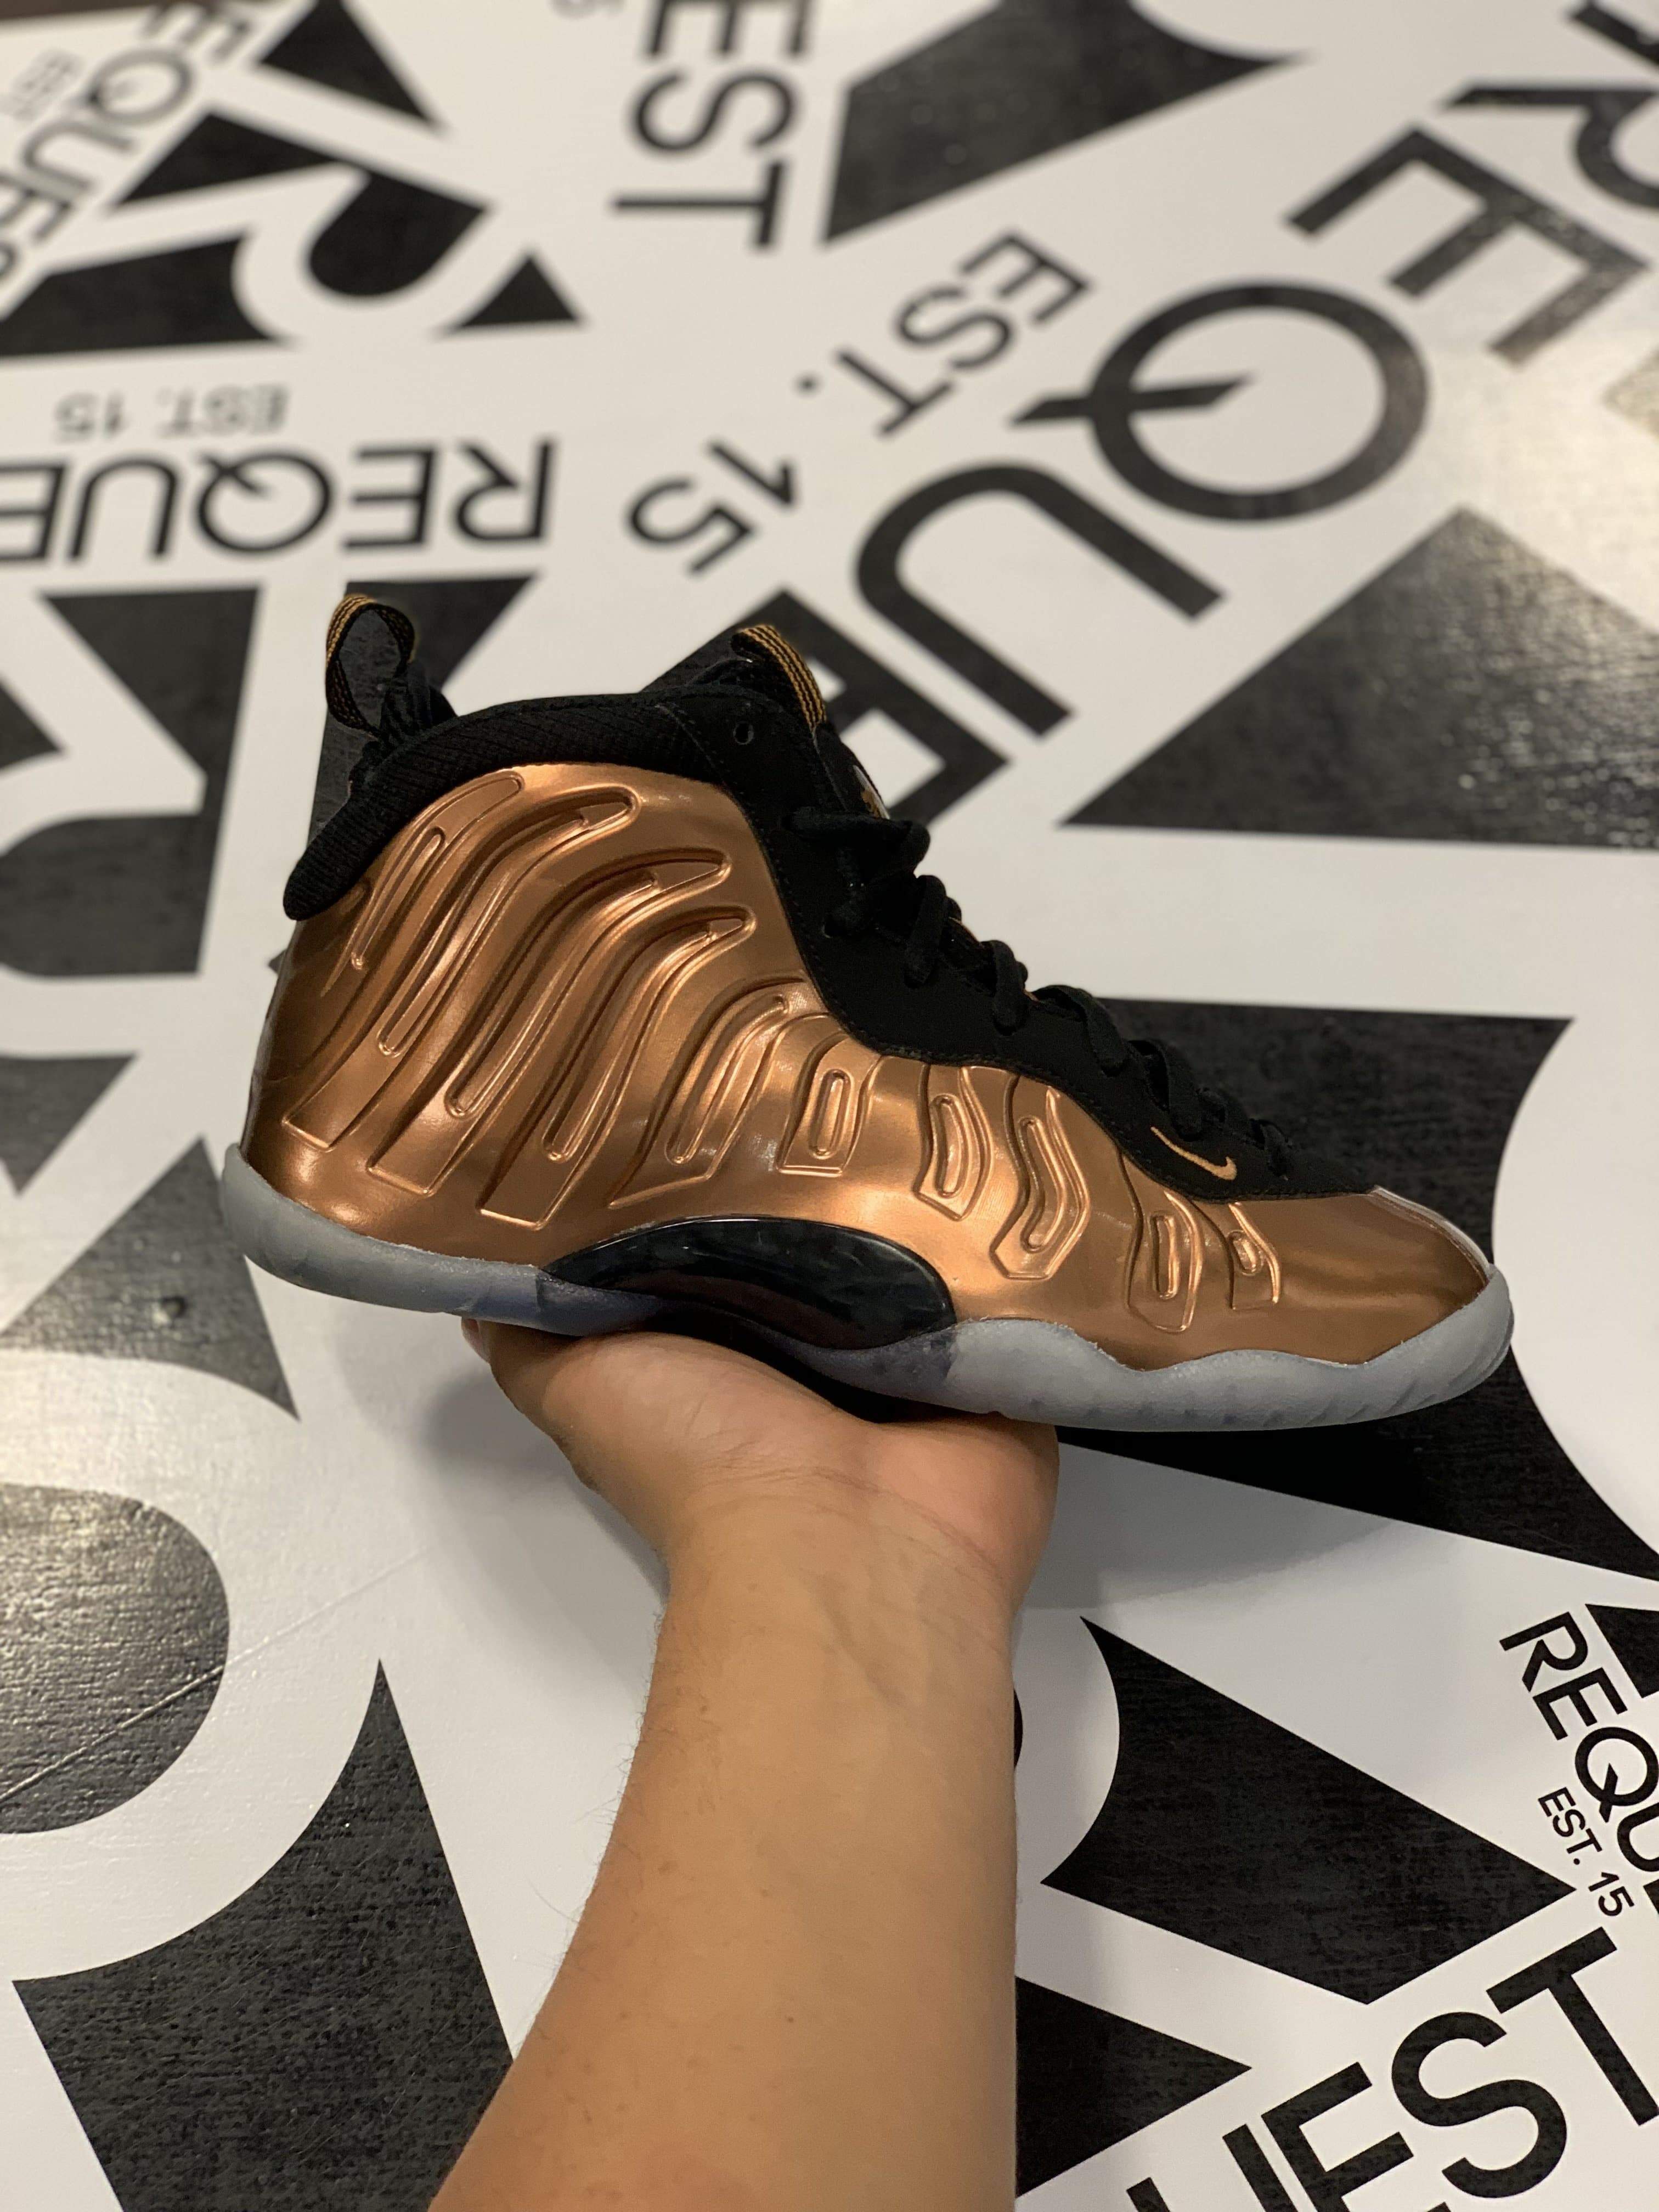 Nike Air Little Posite One “Copper”